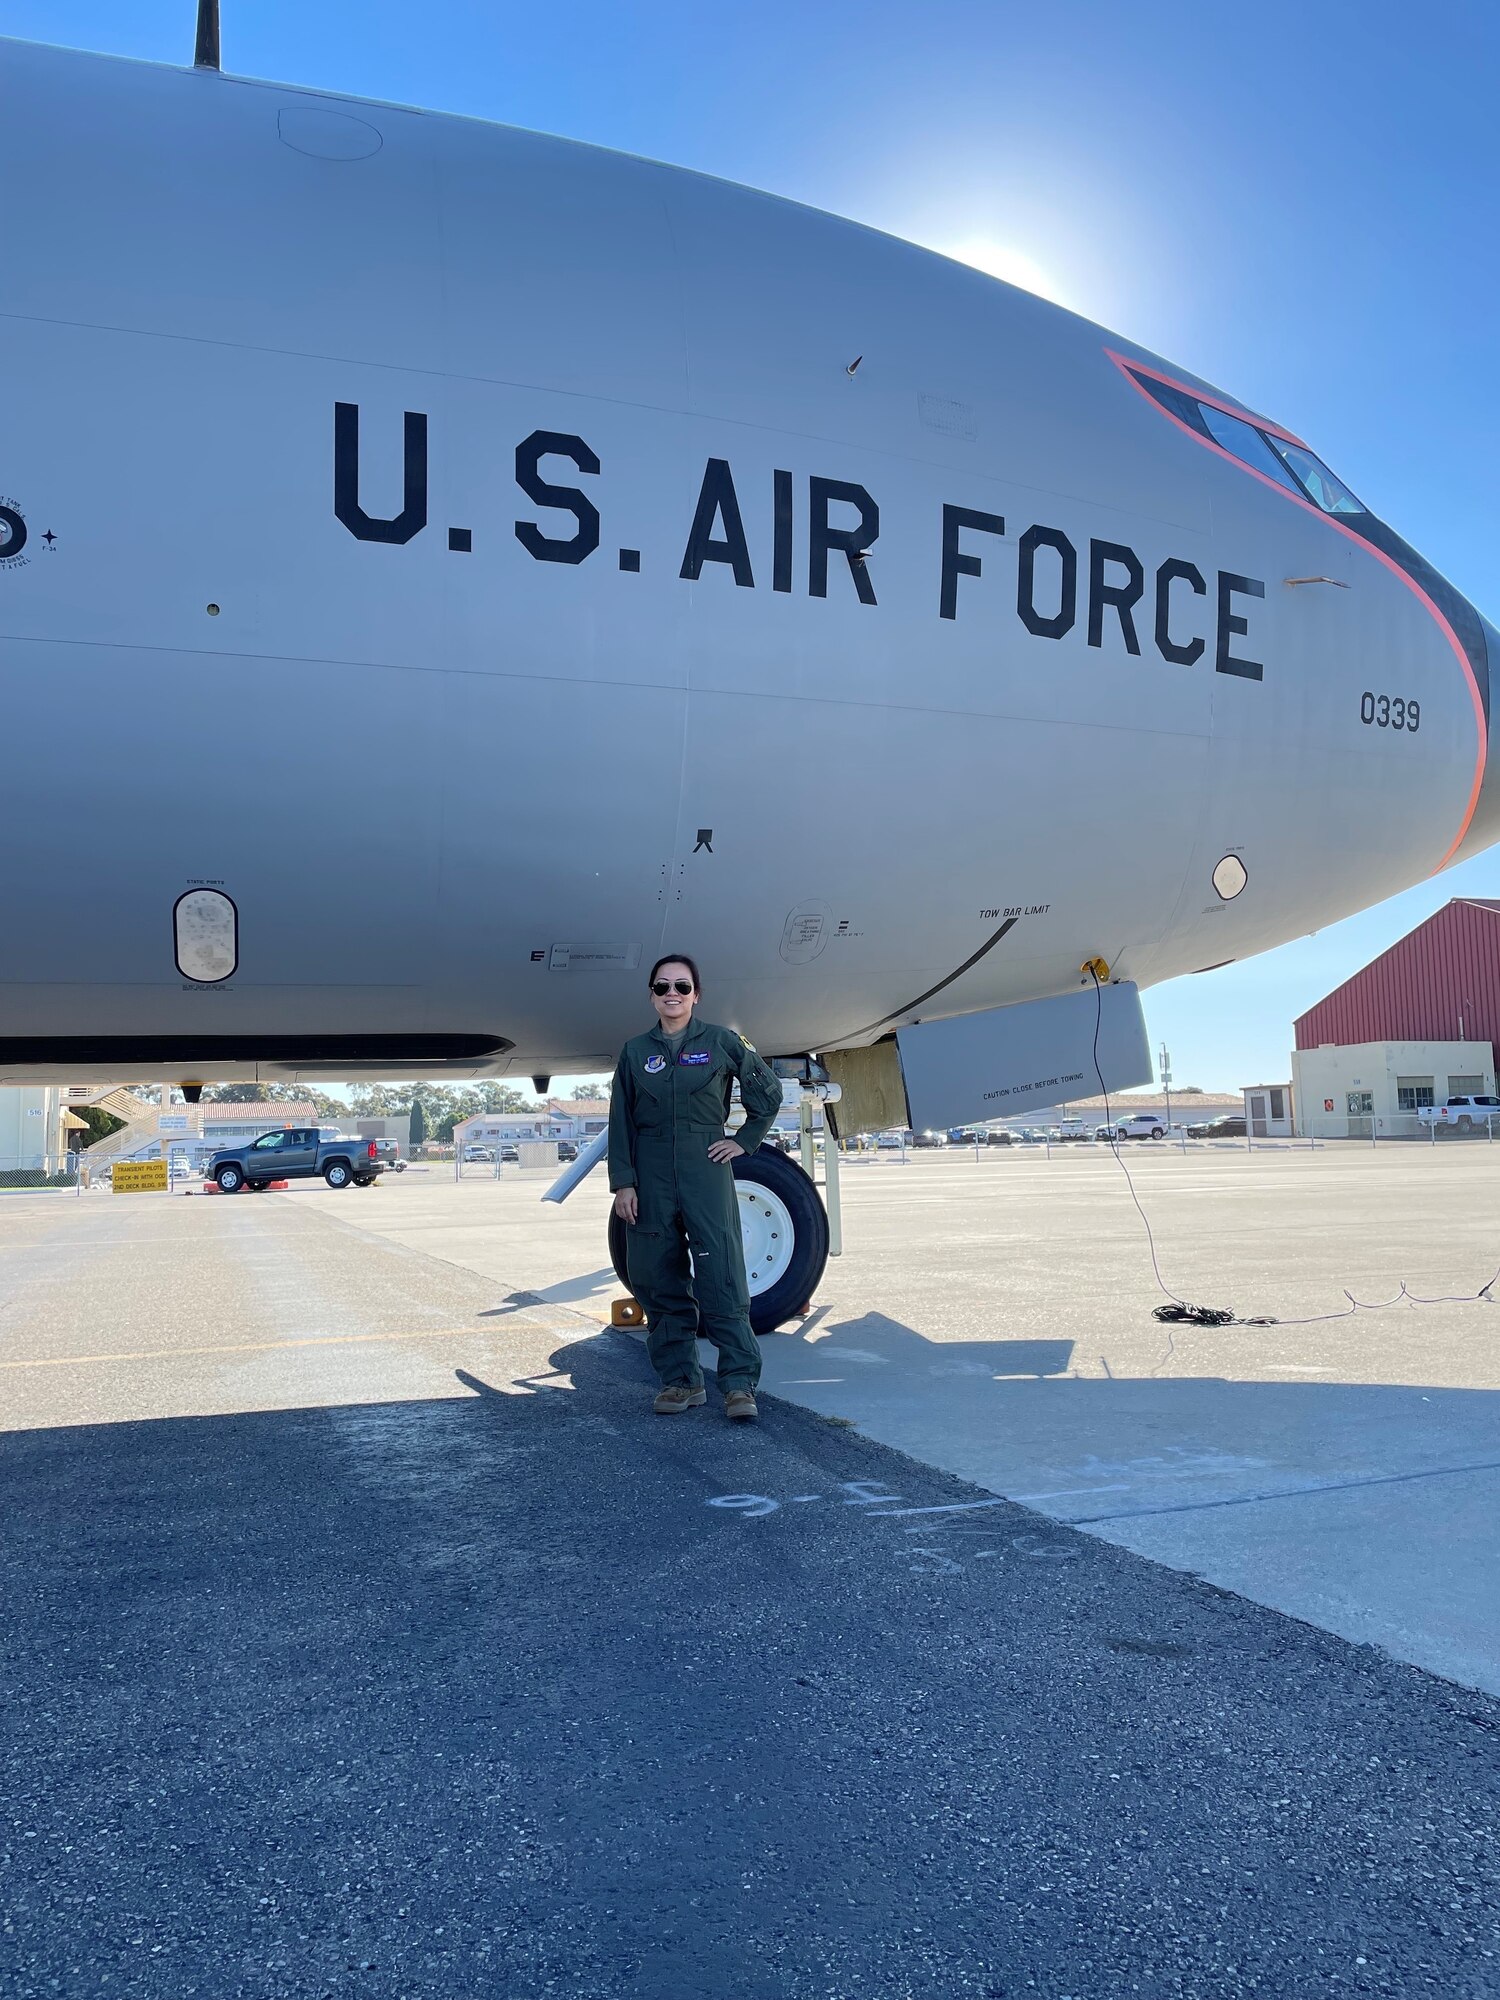 Capt. Geryn Paguio standing in front of a U.S. Air Force plane